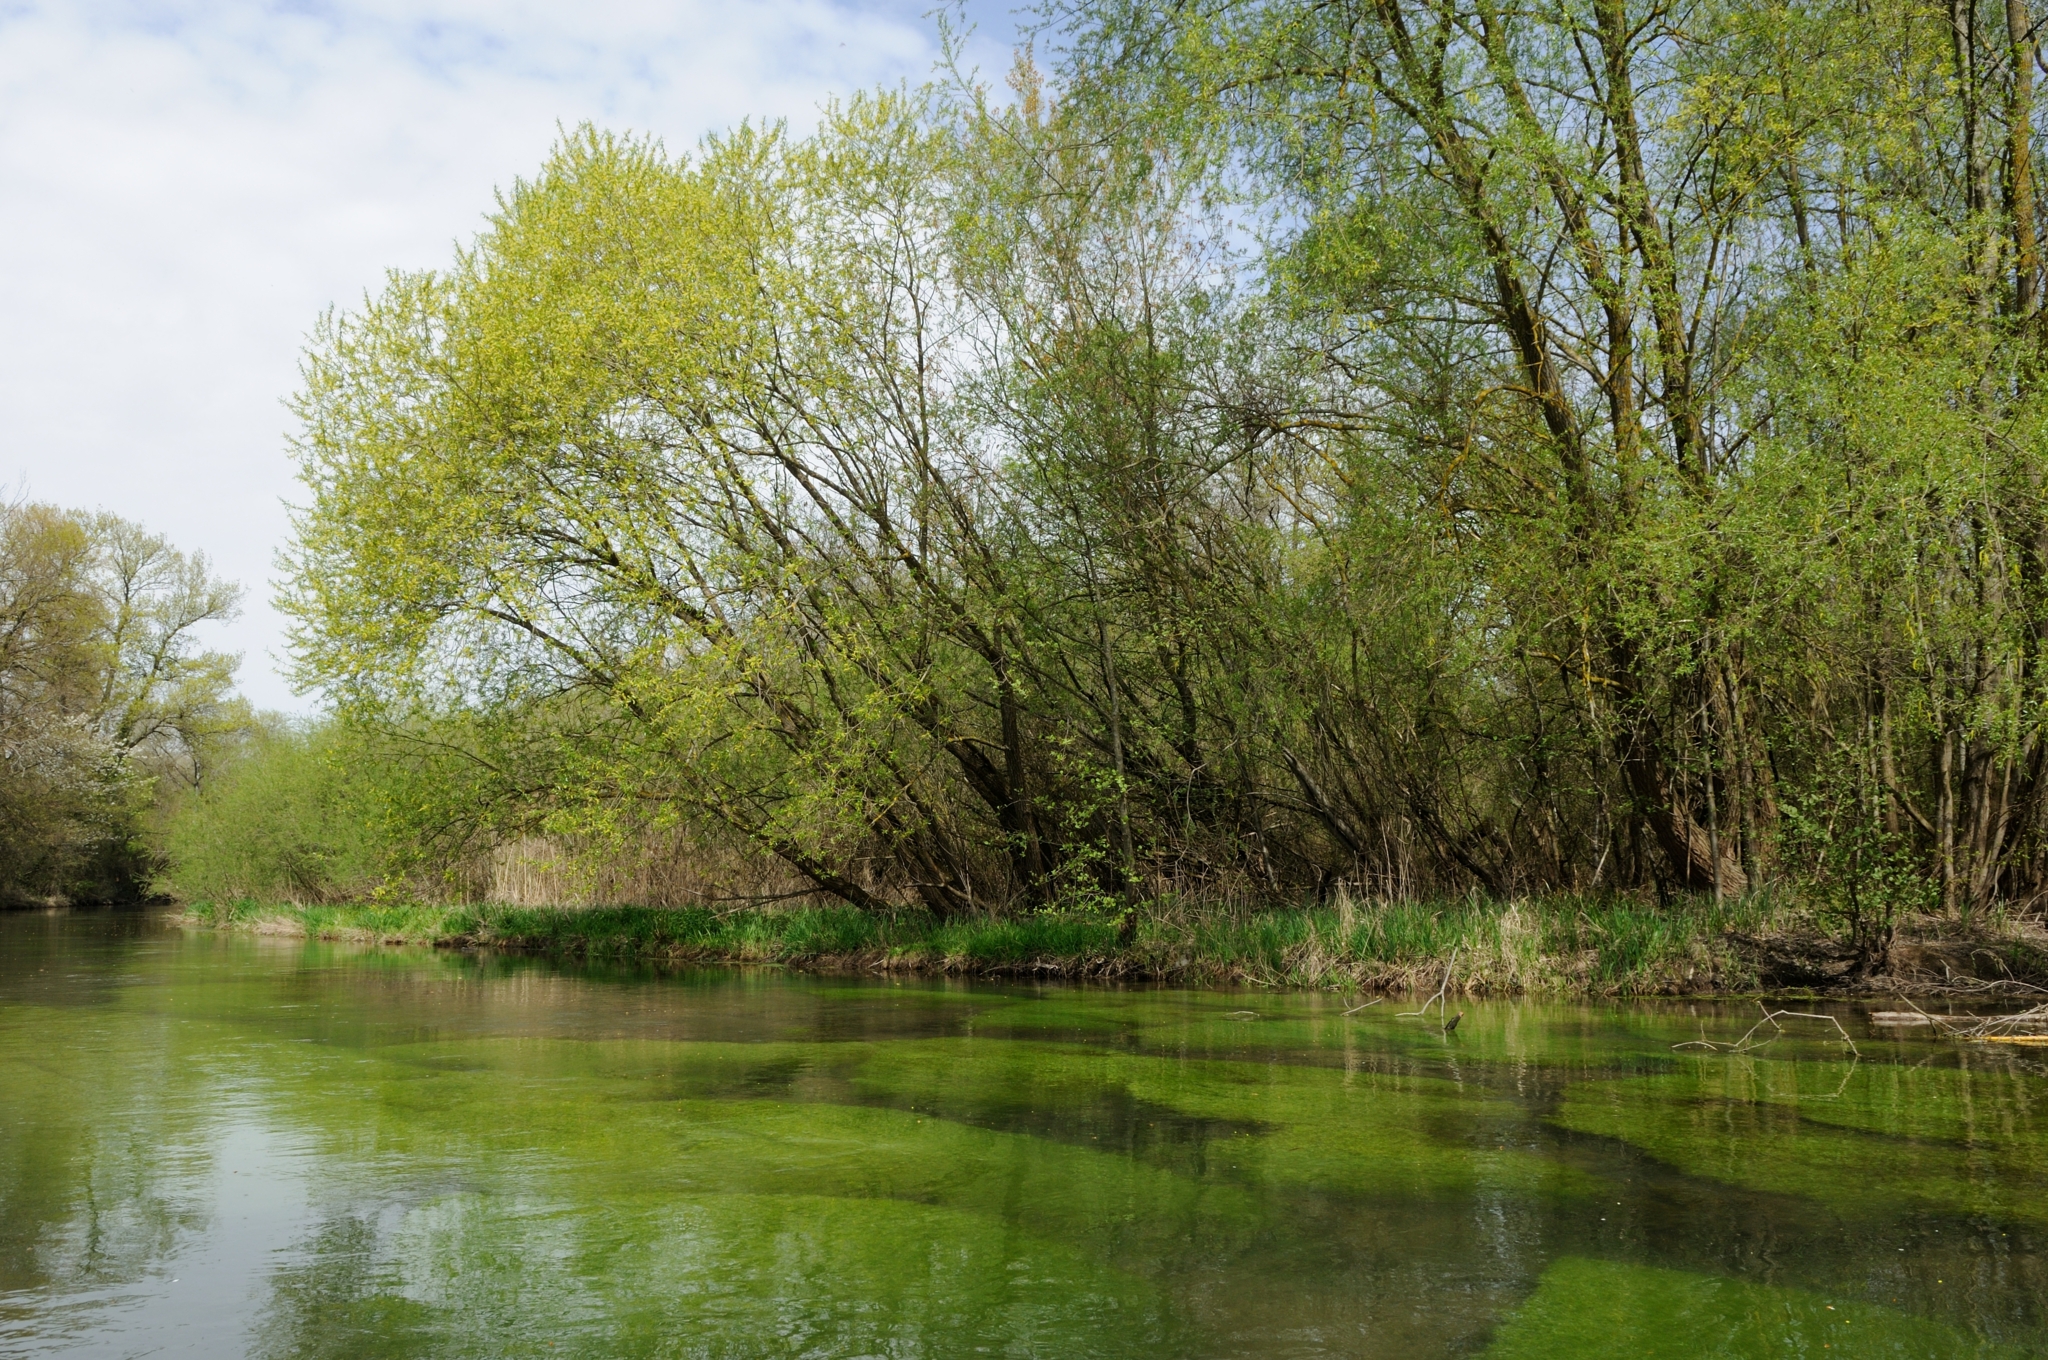 The  photo shows a green river landscape.